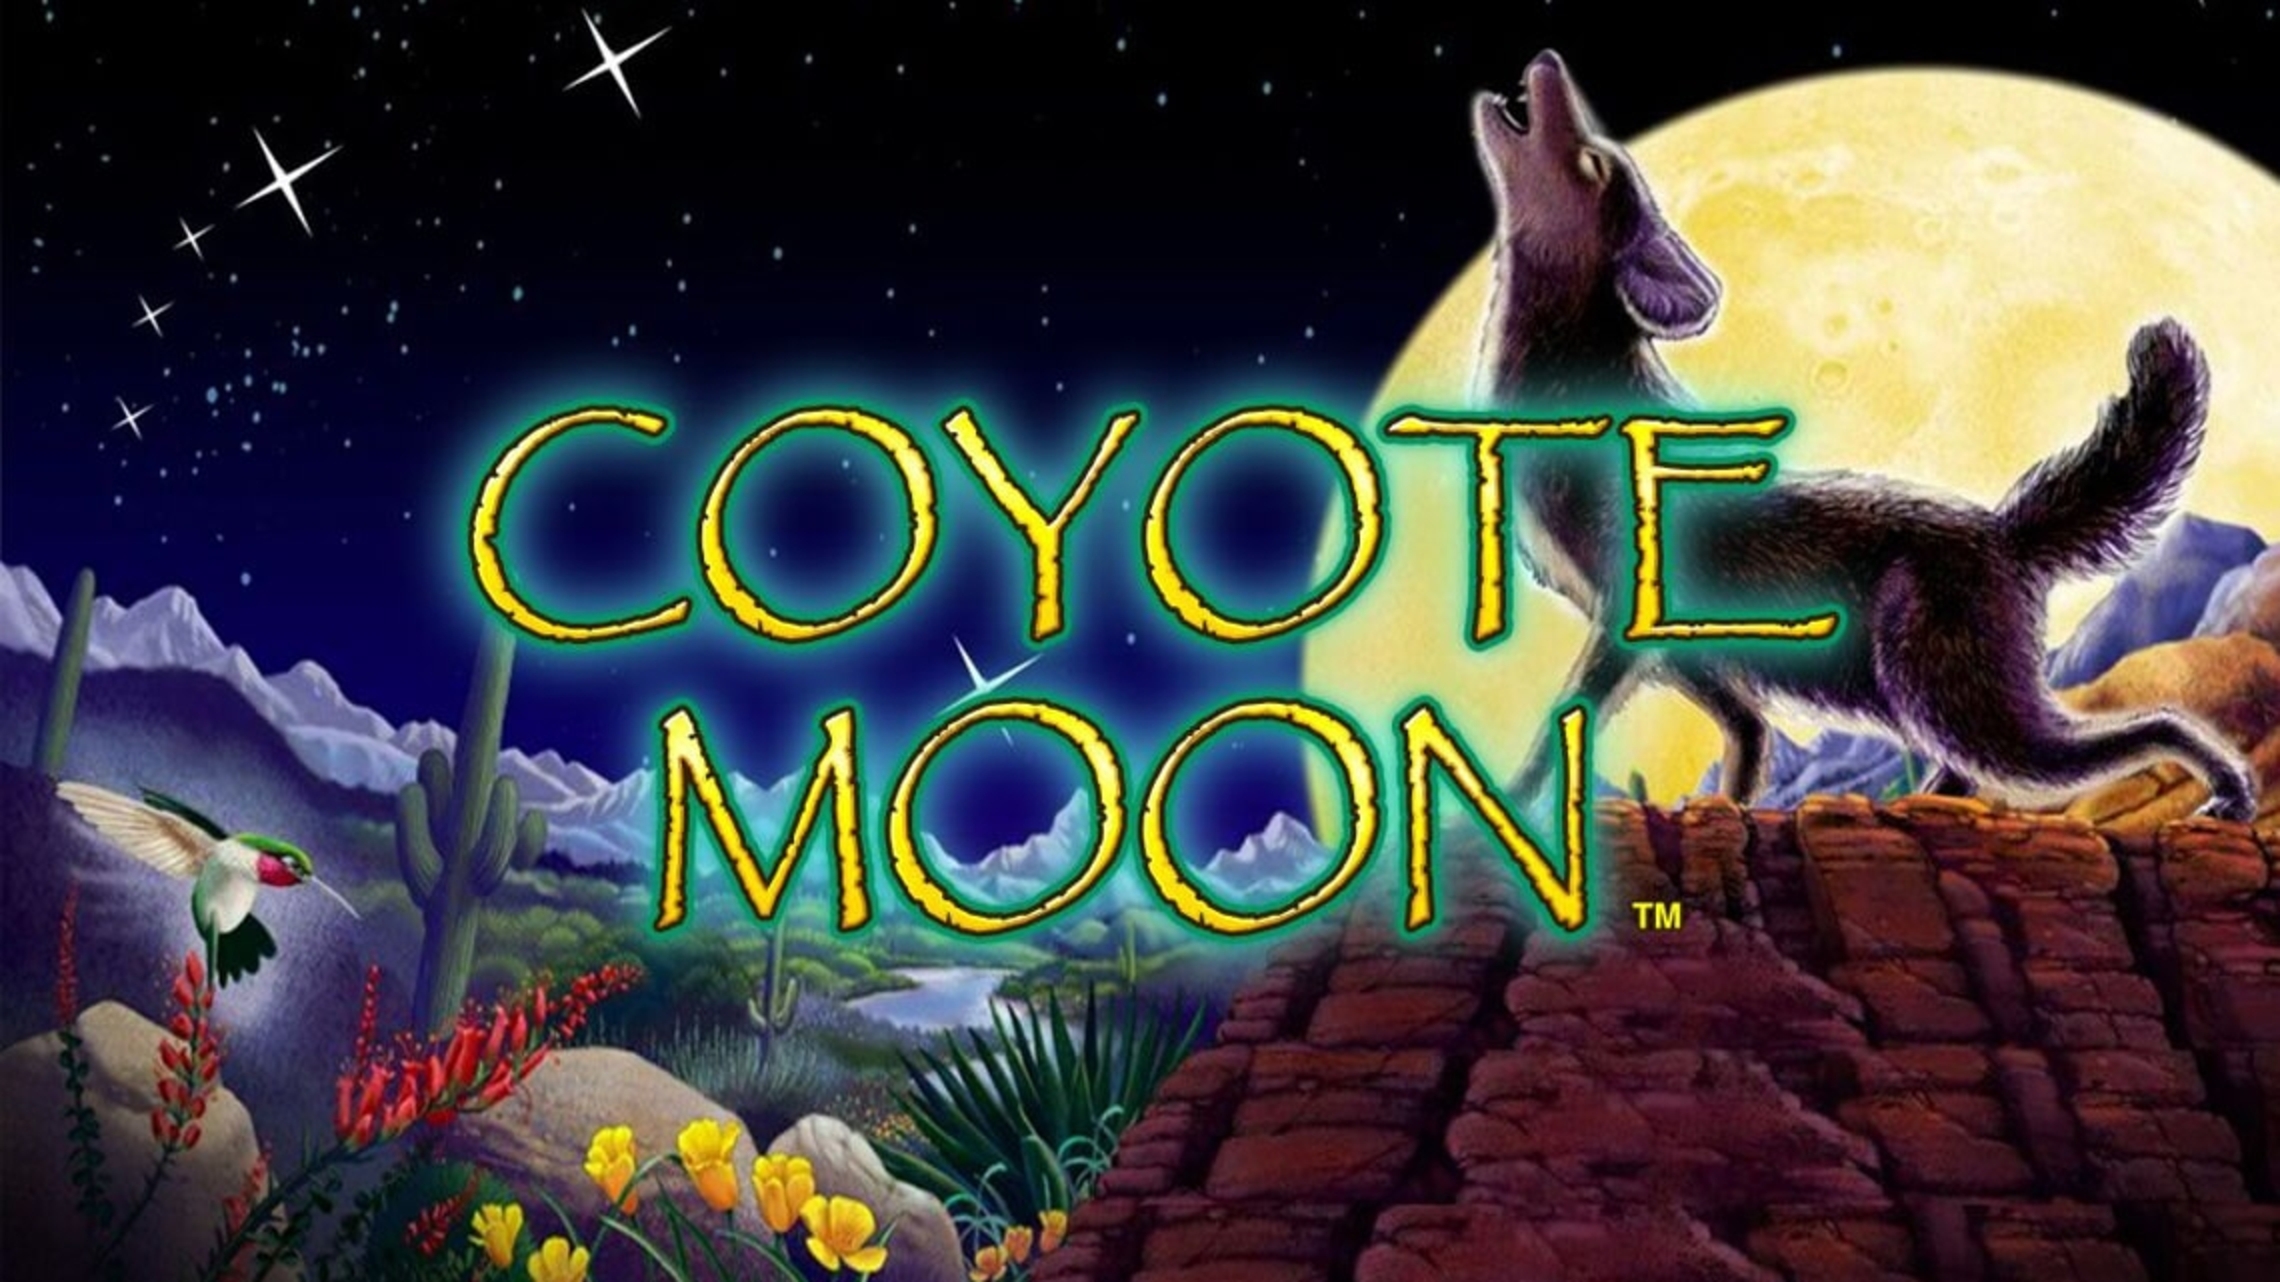 The Coyote Moon Online Slot Demo Game by IGT